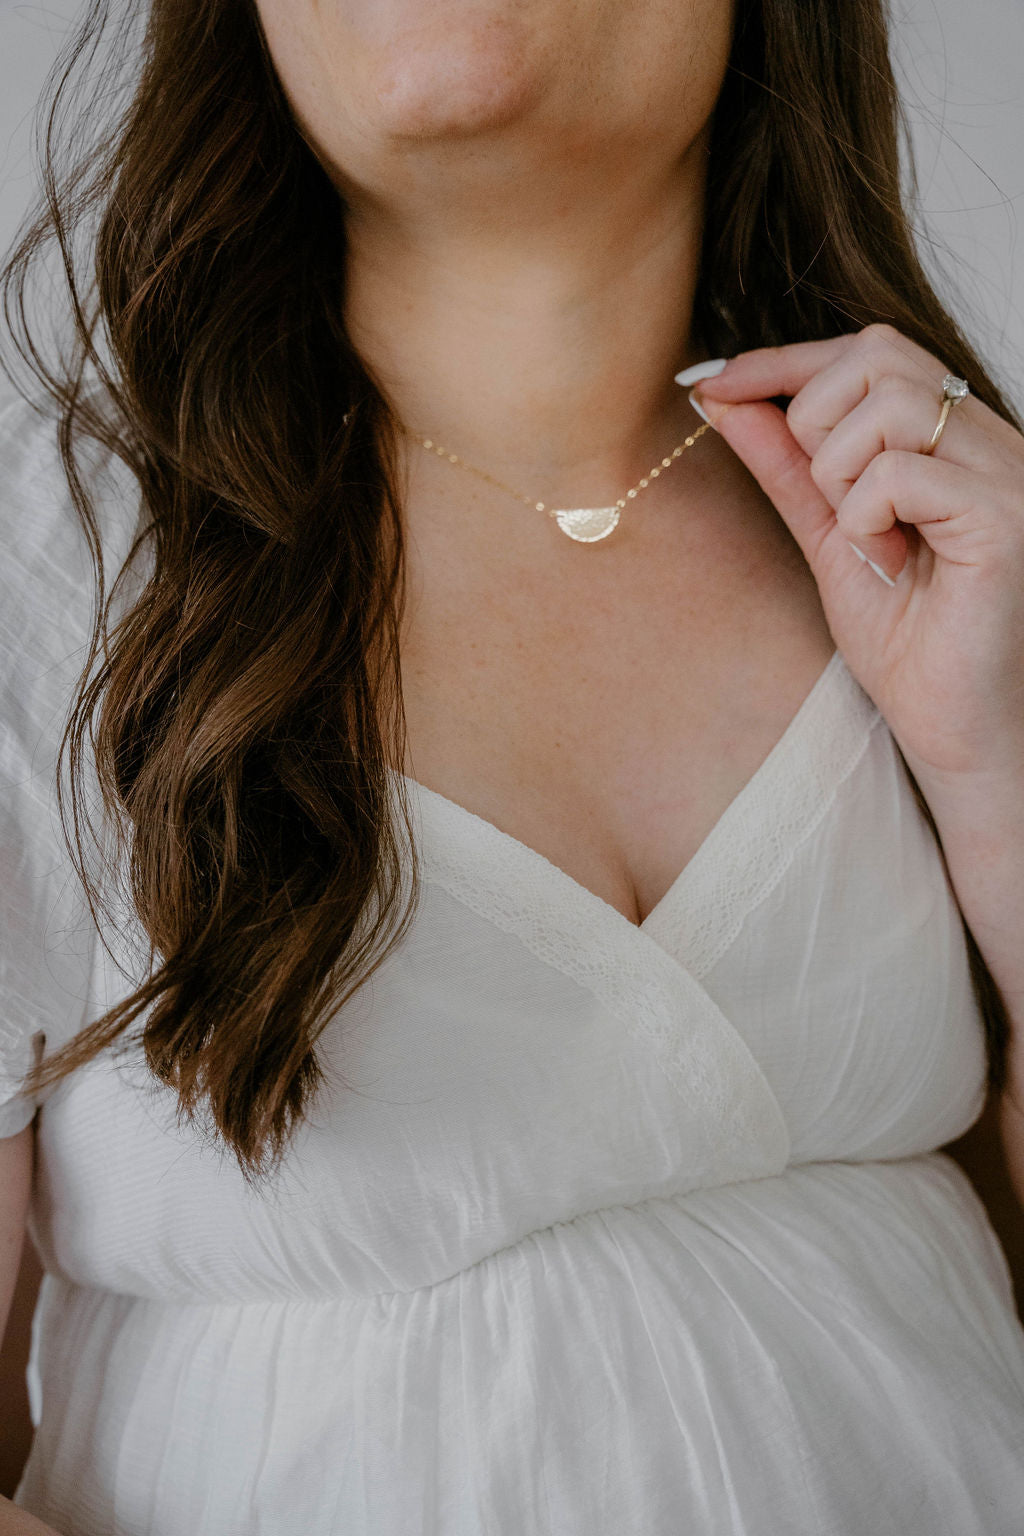 The Hammered Half Moon Necklace